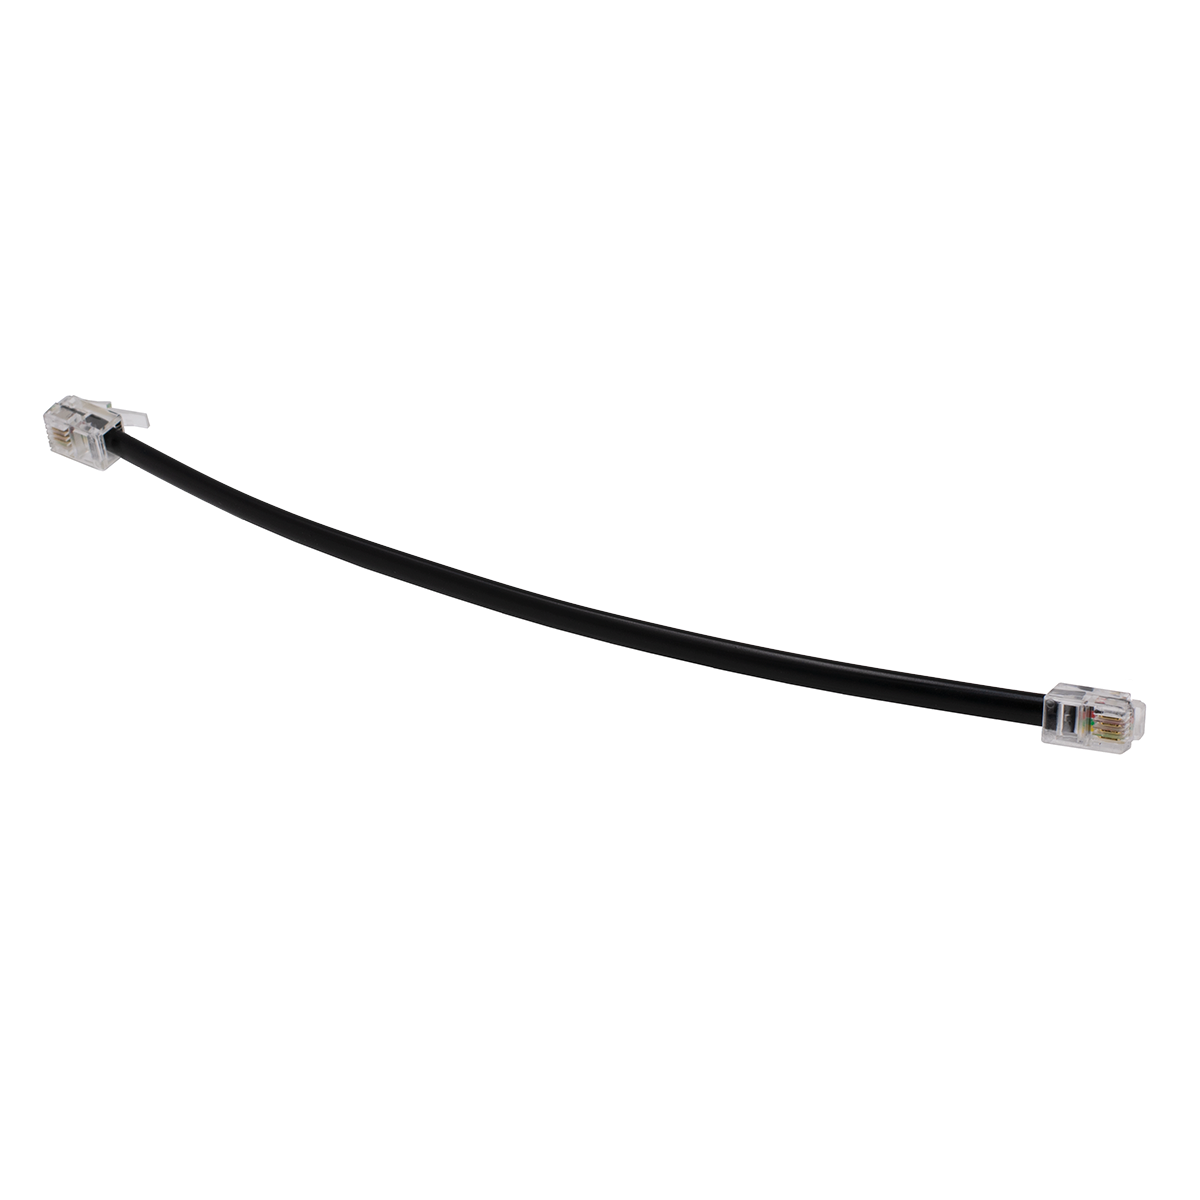 7" Straight (Non-Coiled) Black Handset Cord